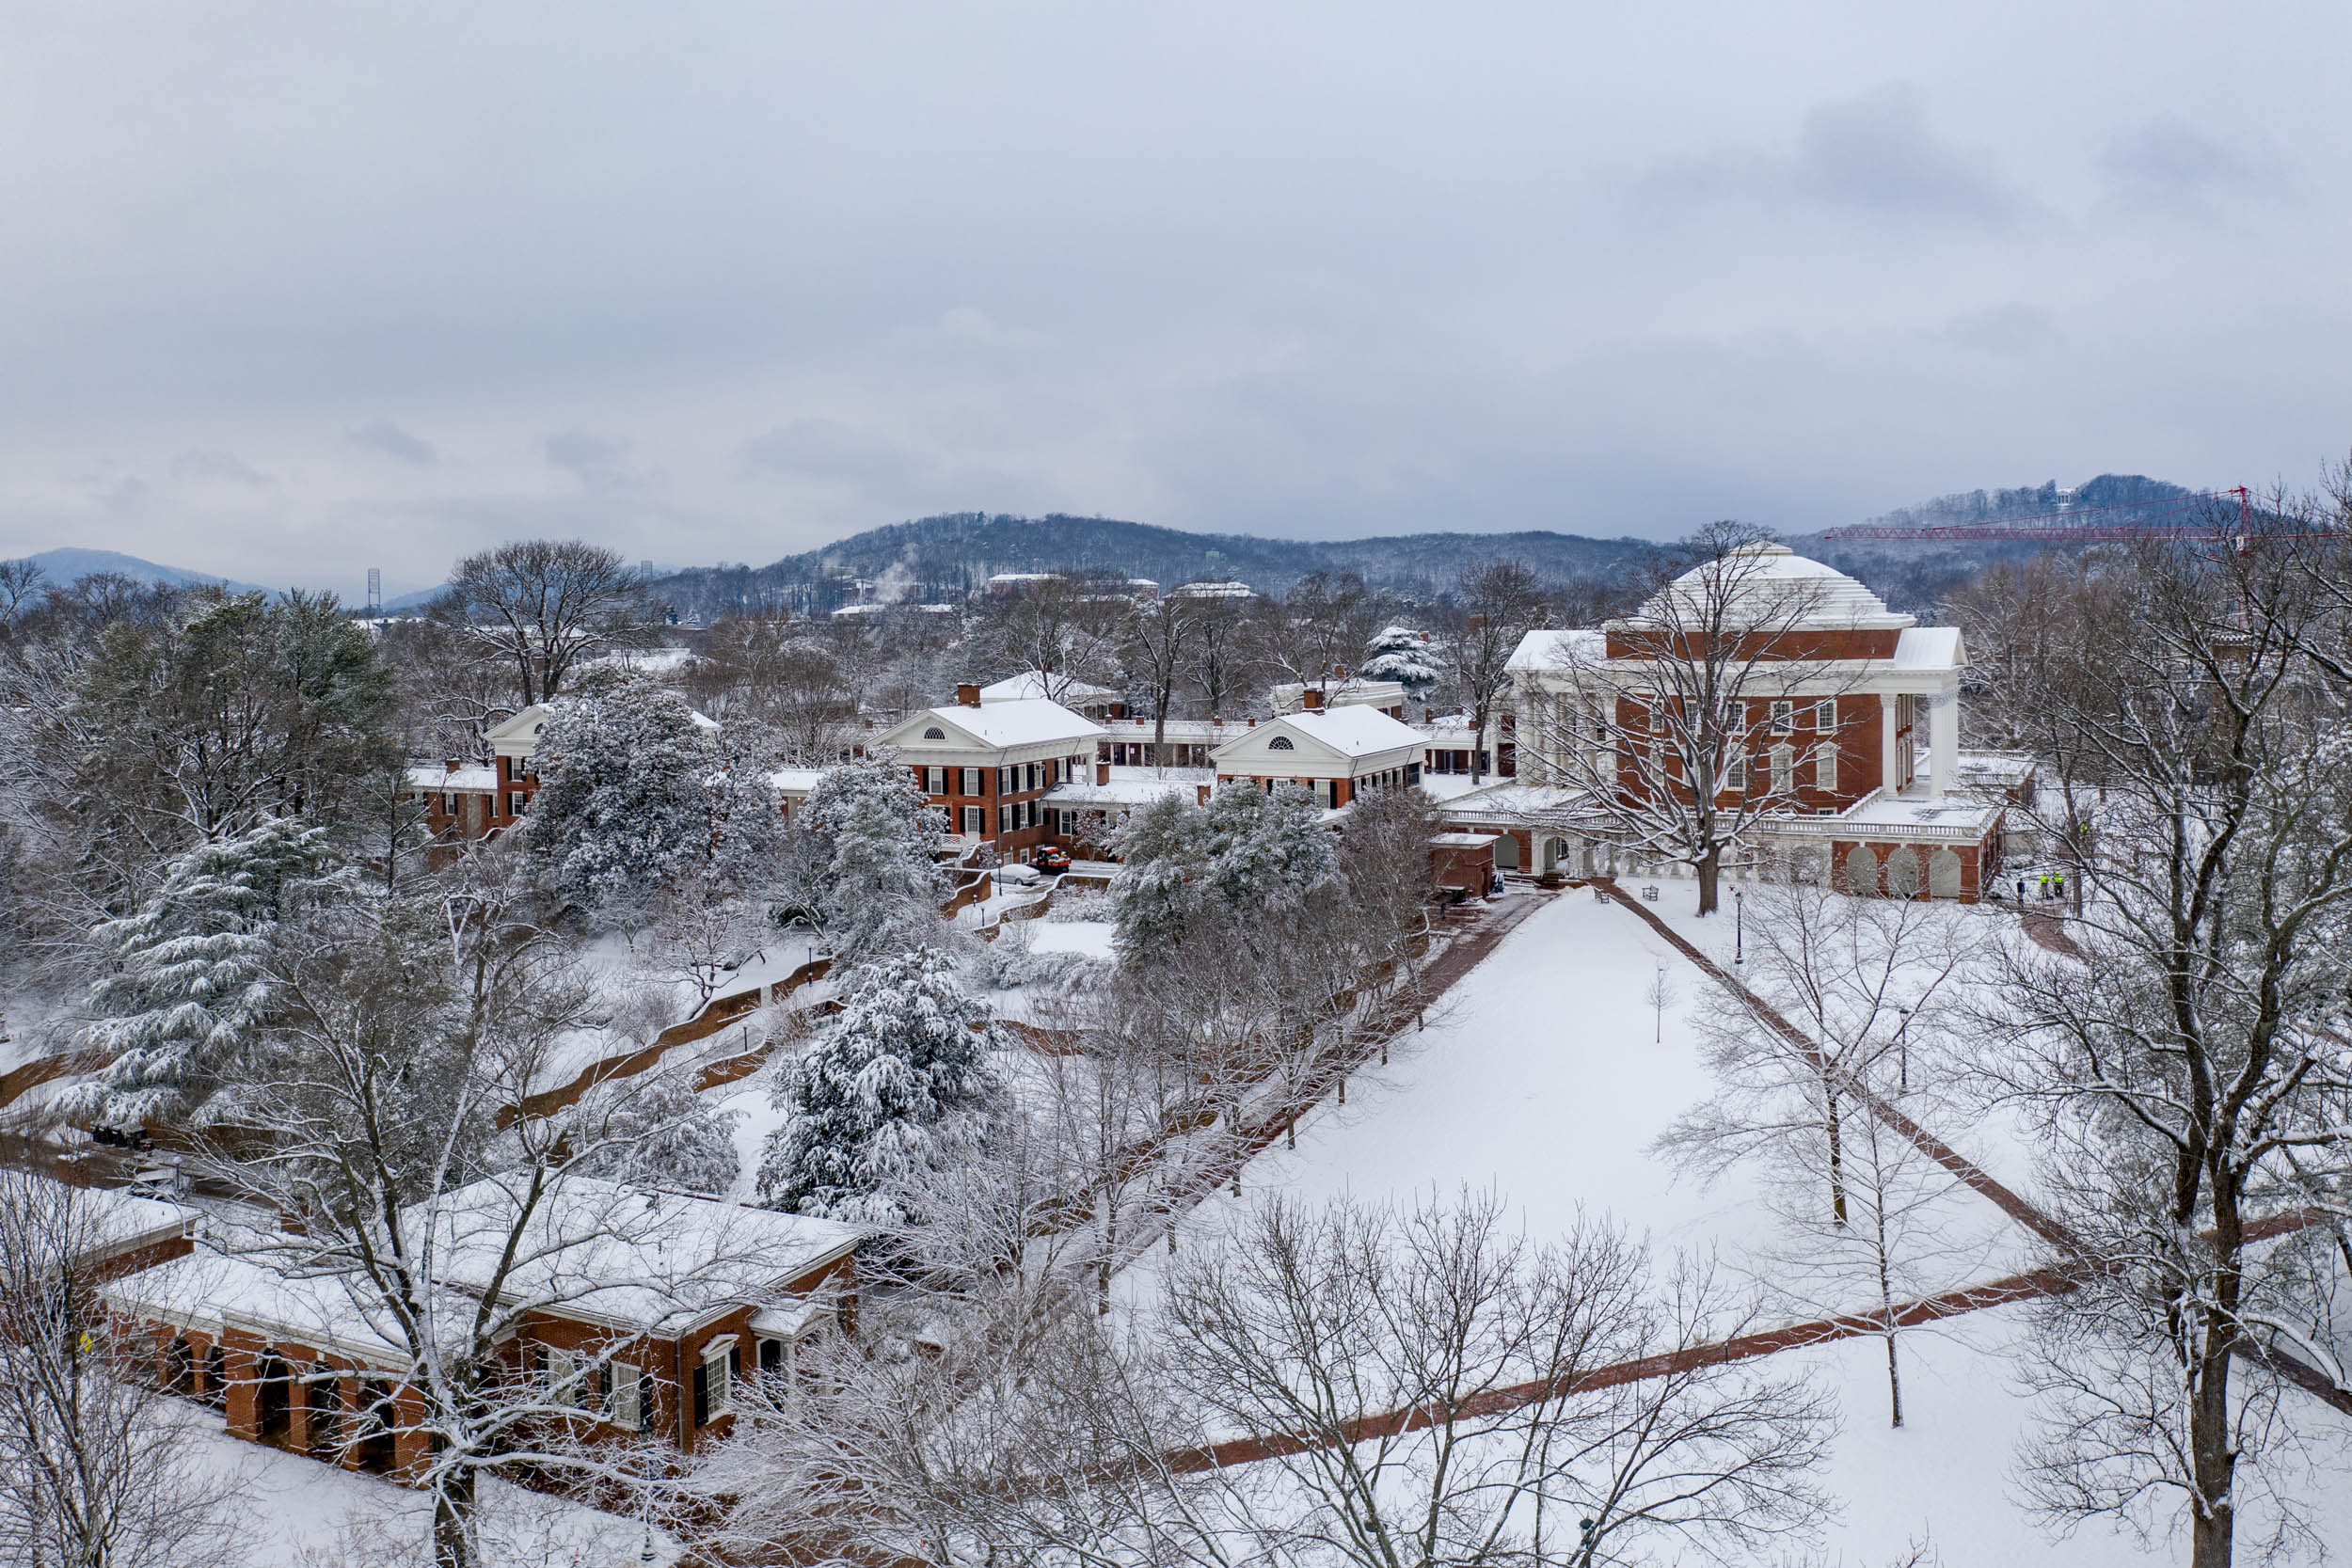 Arial view of the Rotunda in the snow